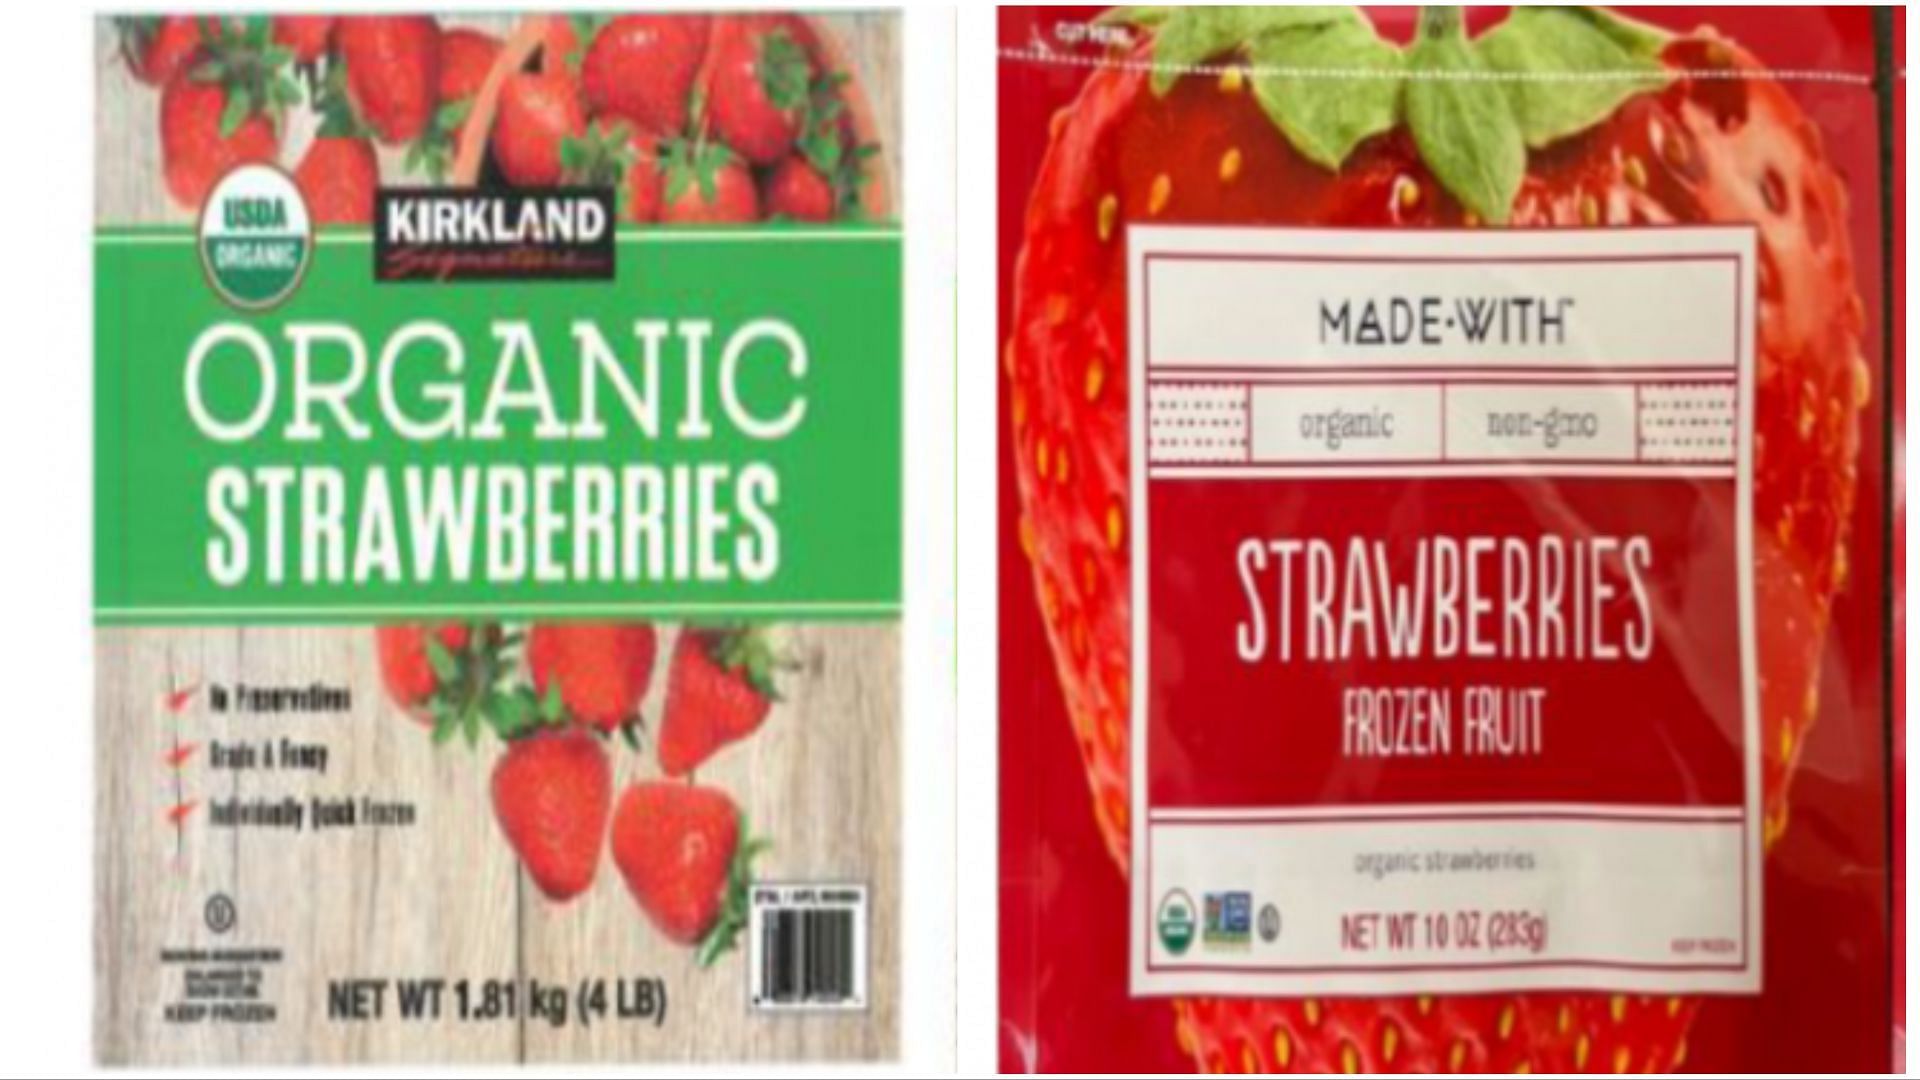 Kirkland frozen strawberries recall Reason, affected lot numbers, and